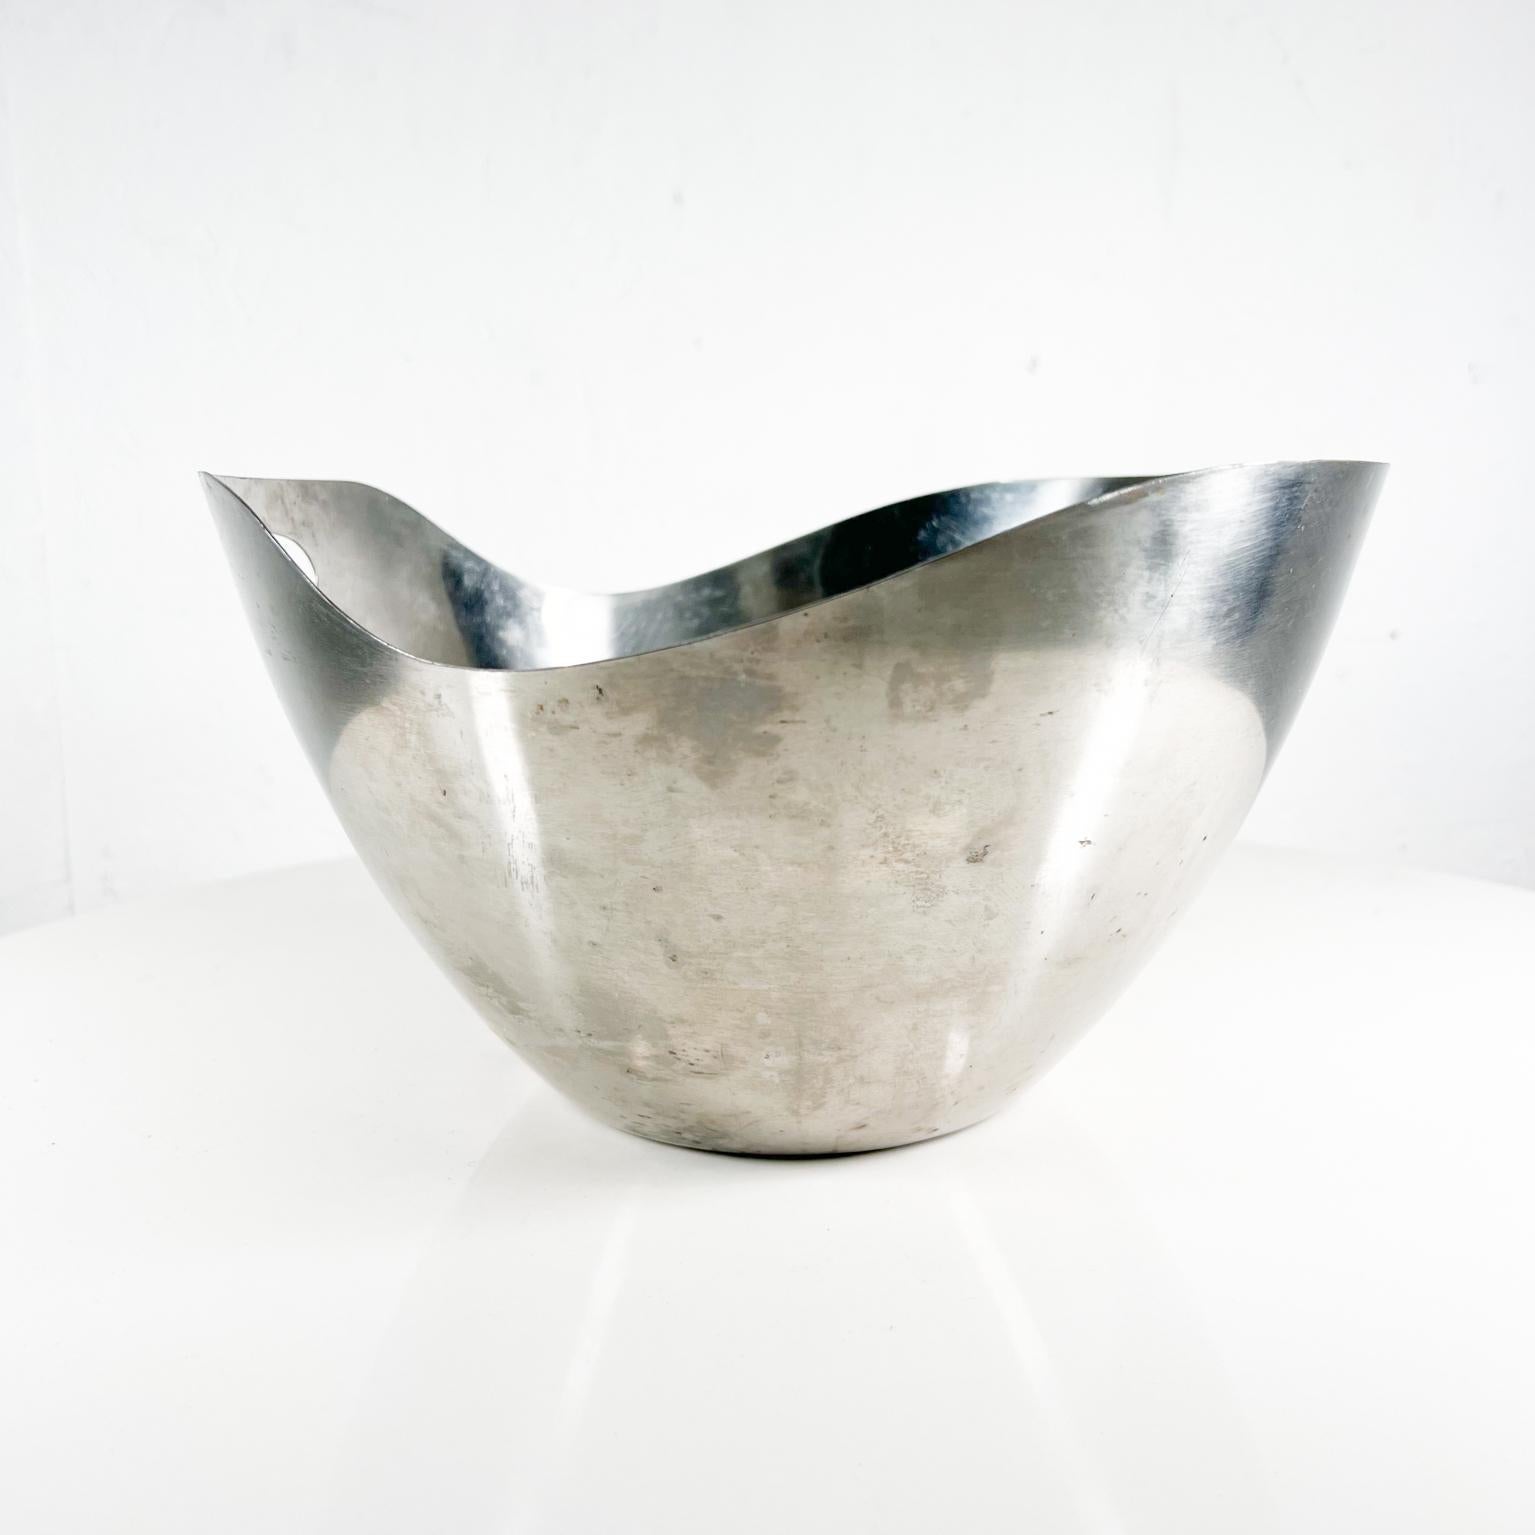 
1960s Modern Sculptural Stainless-Steel Wave Salad Bowl from Japan
in the Style of Carl Auböck
Stamped 18-8 Stainless Japan
5.88 x 10.38 d x 10 diameter
Original vintage condition.
See images provided.